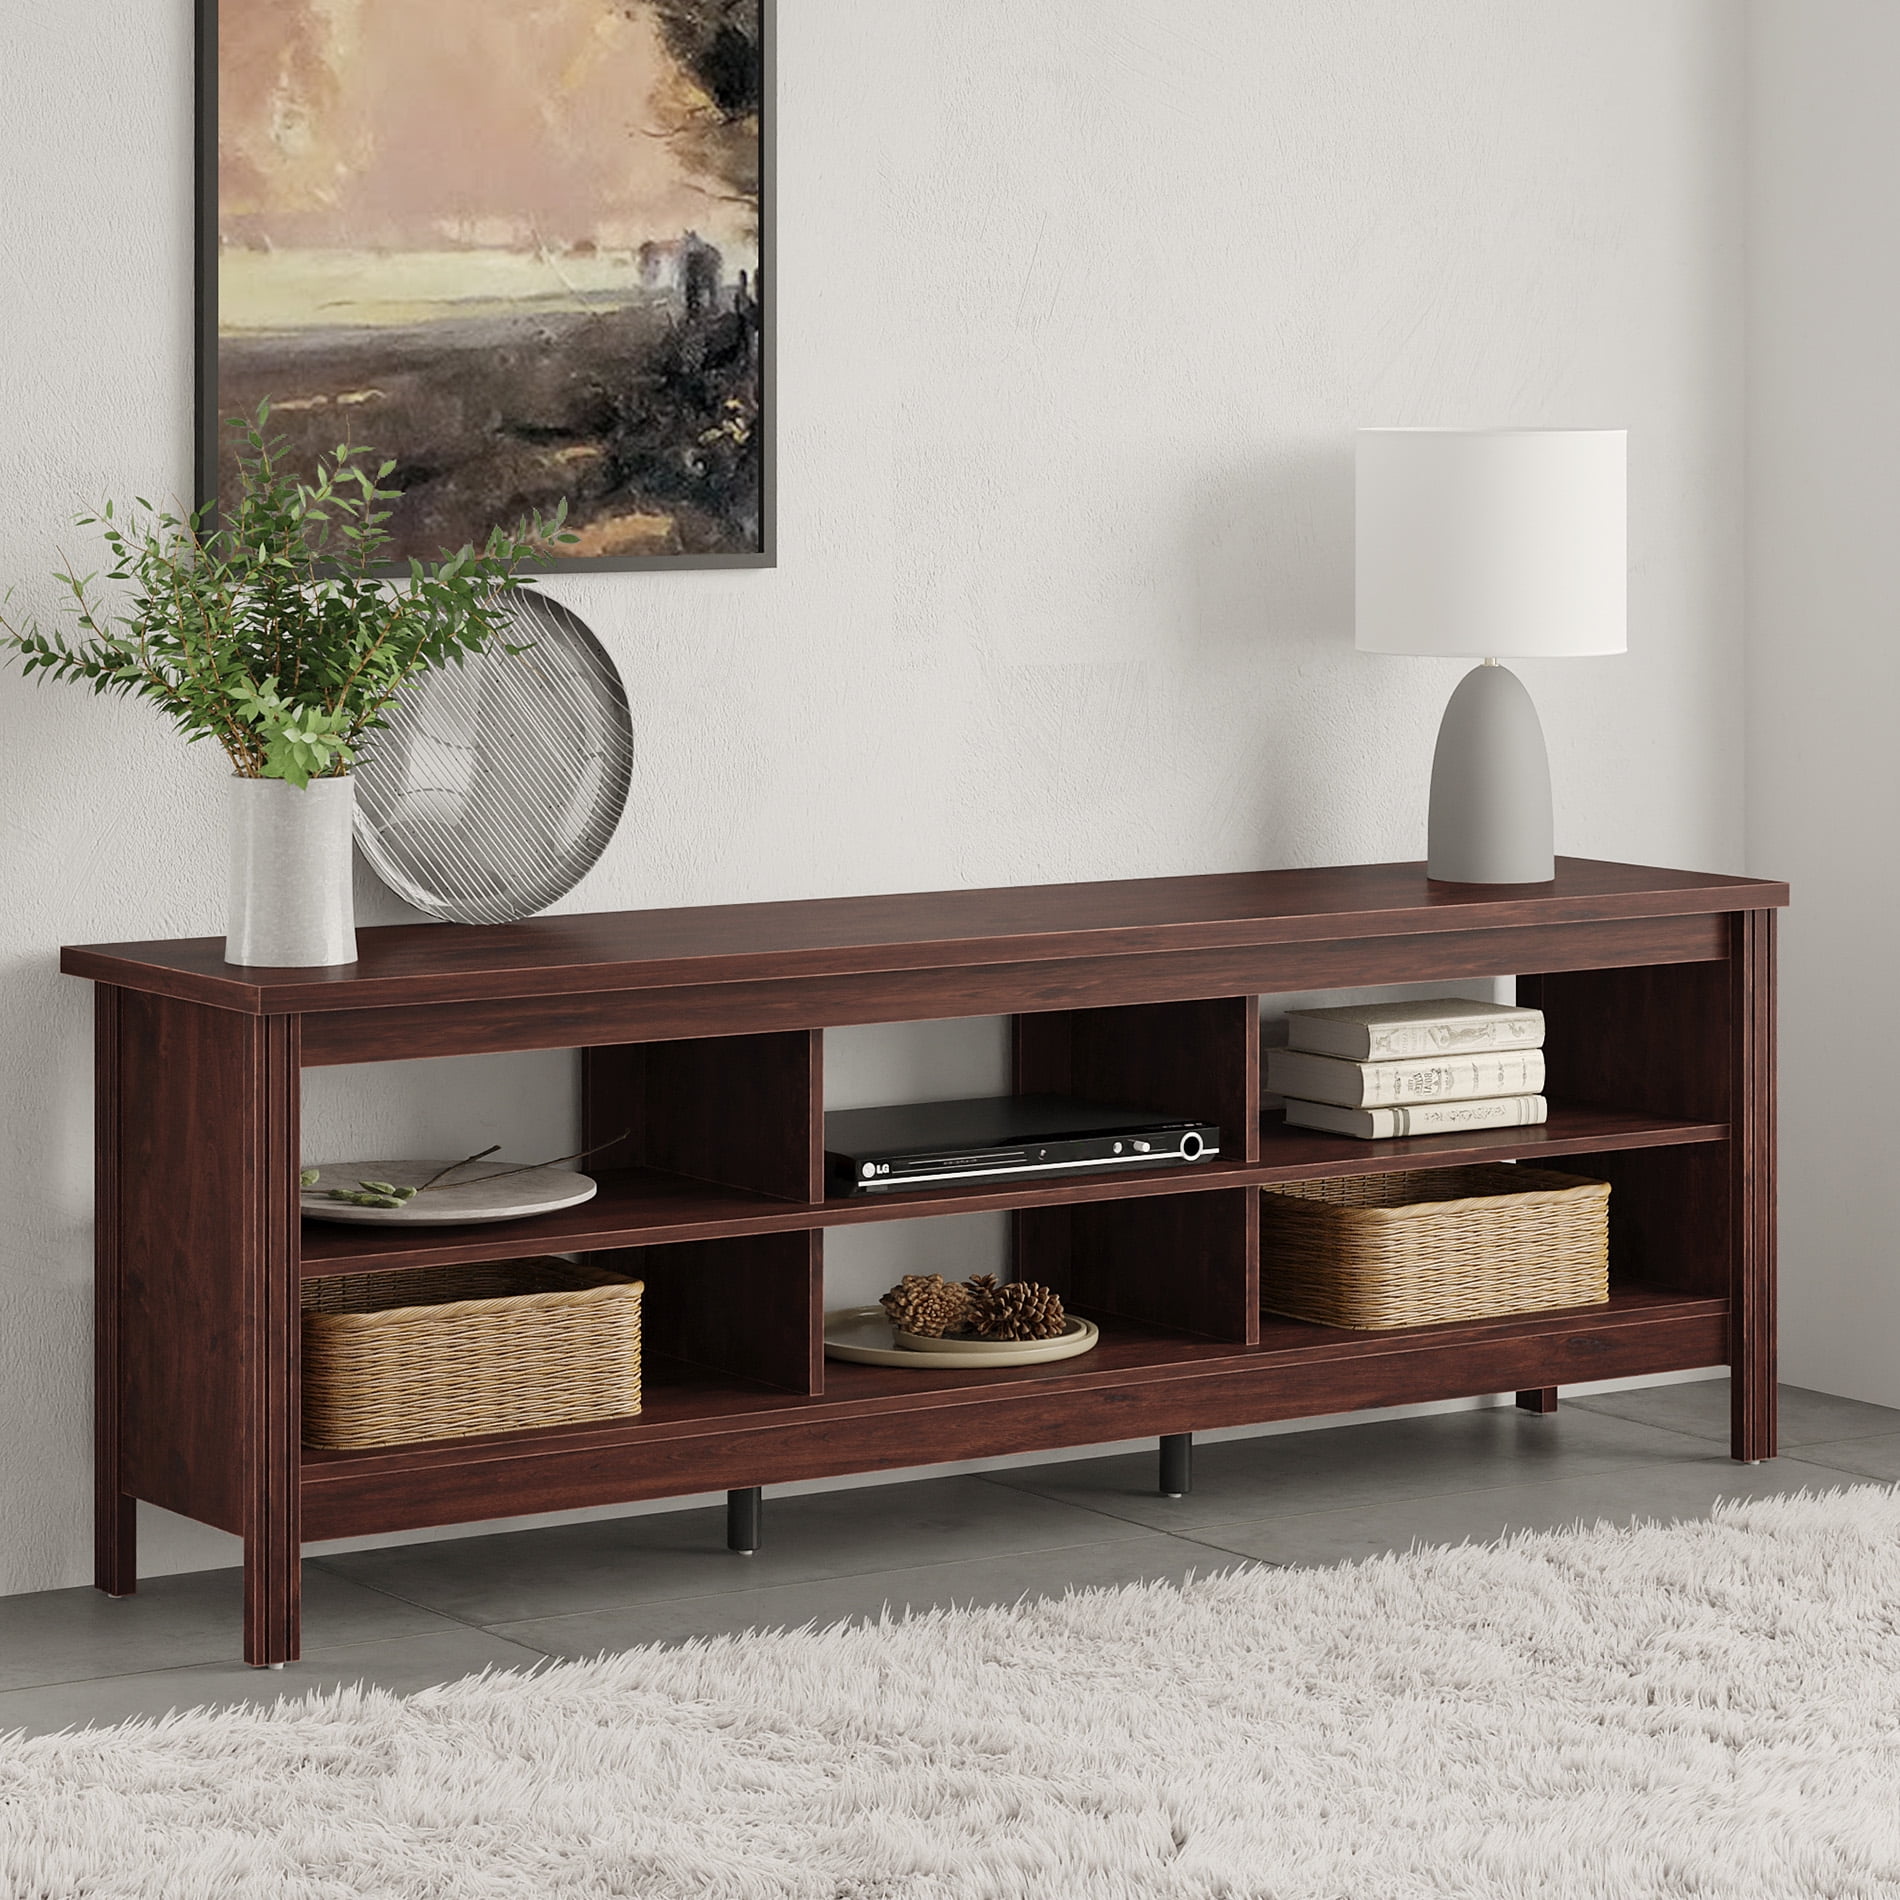 Cherry Two Cabinet TV Stand Home Living Room Entertainment Furniture Den Shelves 